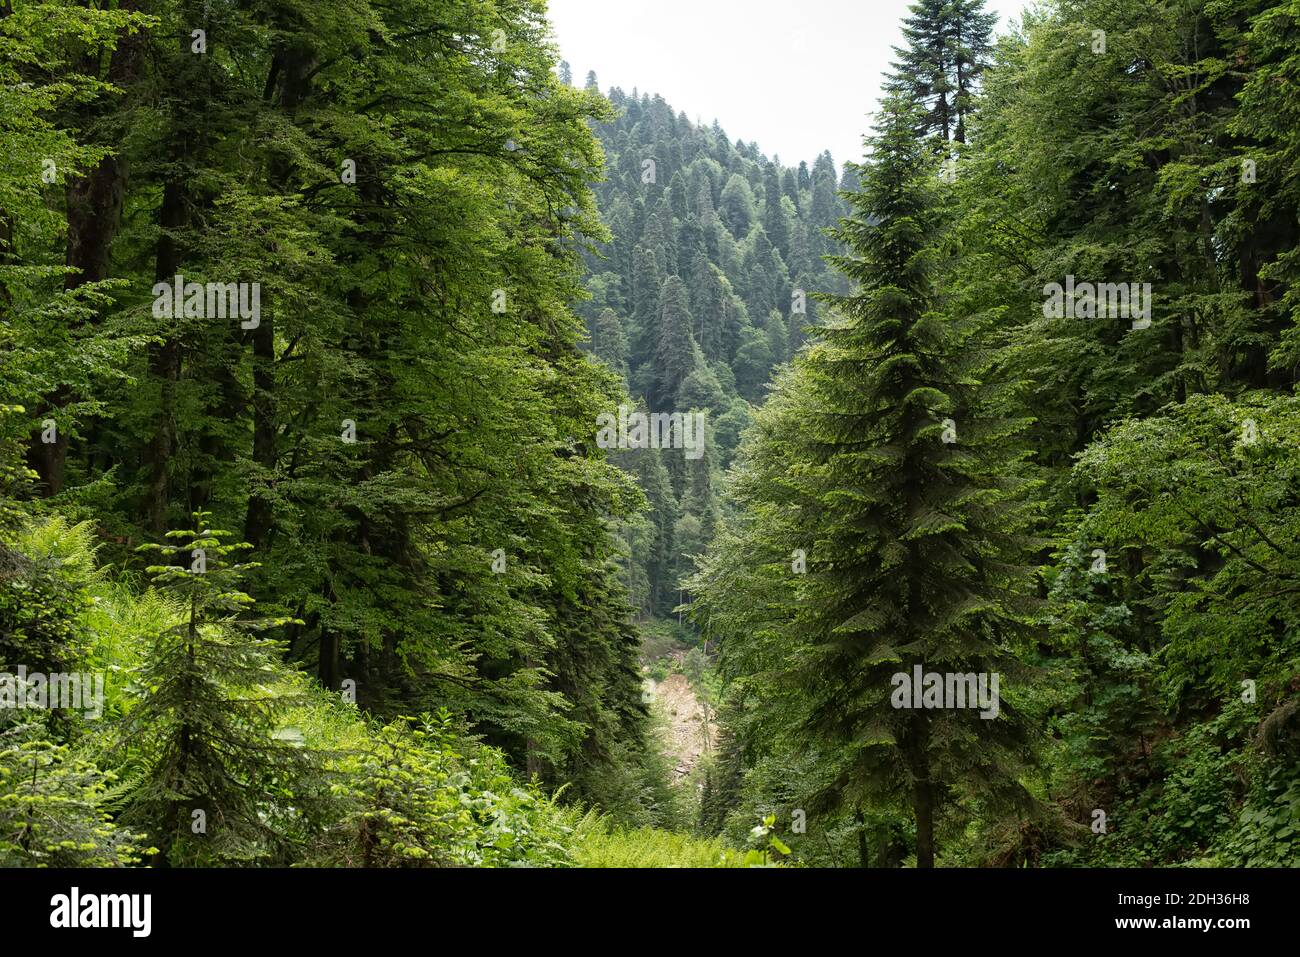 Subtropical rain green forest with many trees Stock Photo